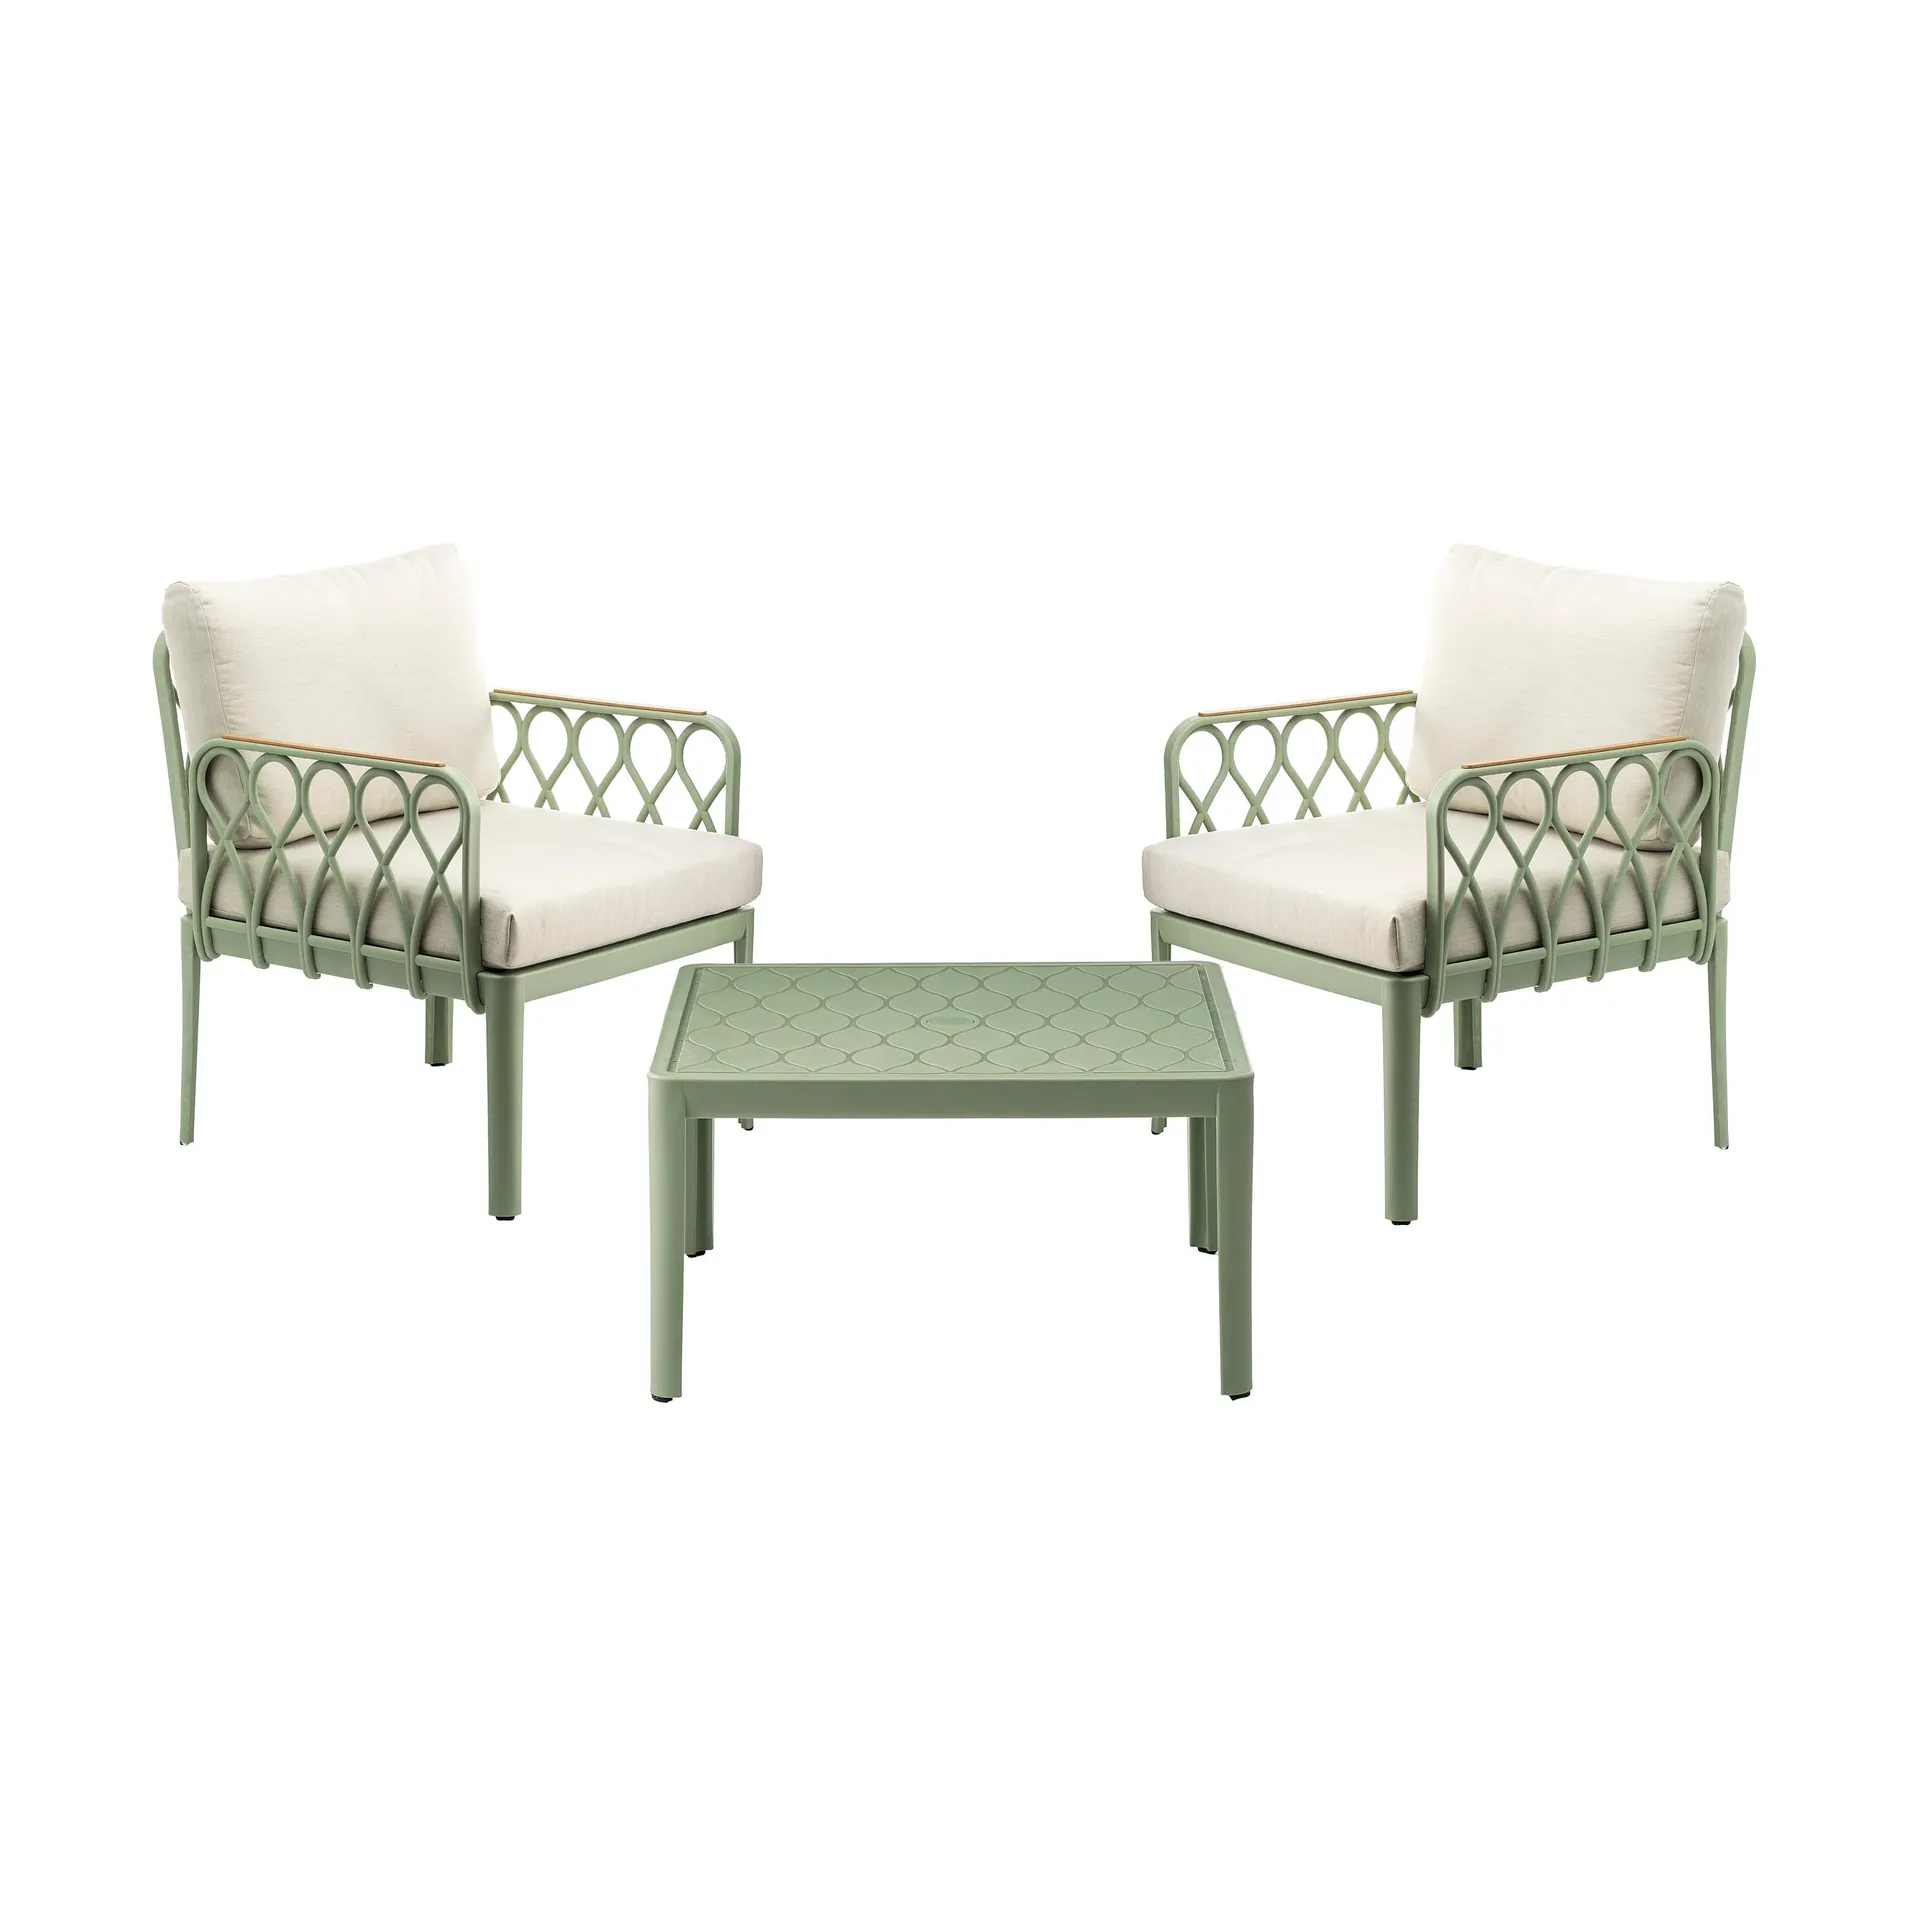 Amsterdam 3-Piece Outdoor Seating Set with Cushions - Light Green